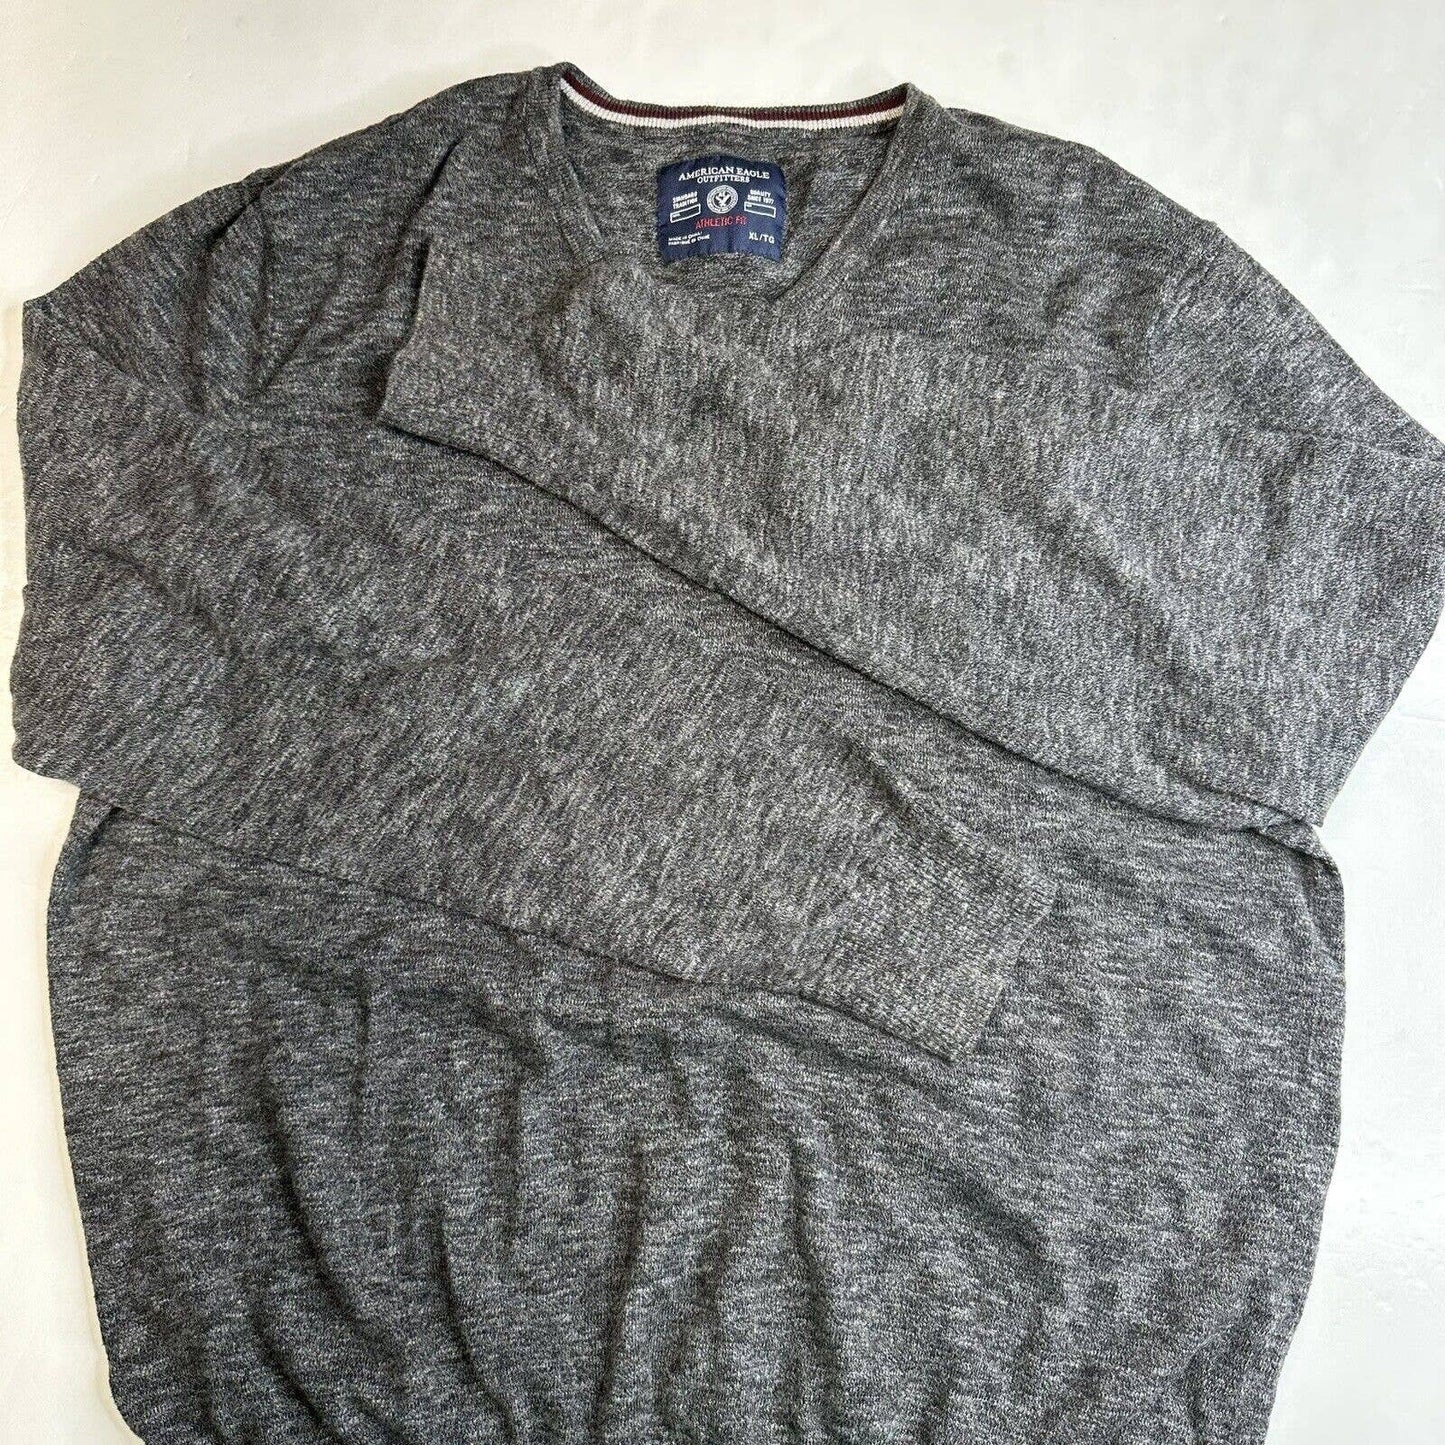 American Eagle Sweater Men XL Gray V-Neck Athletic Fit Long Sleeve Knit Cotton